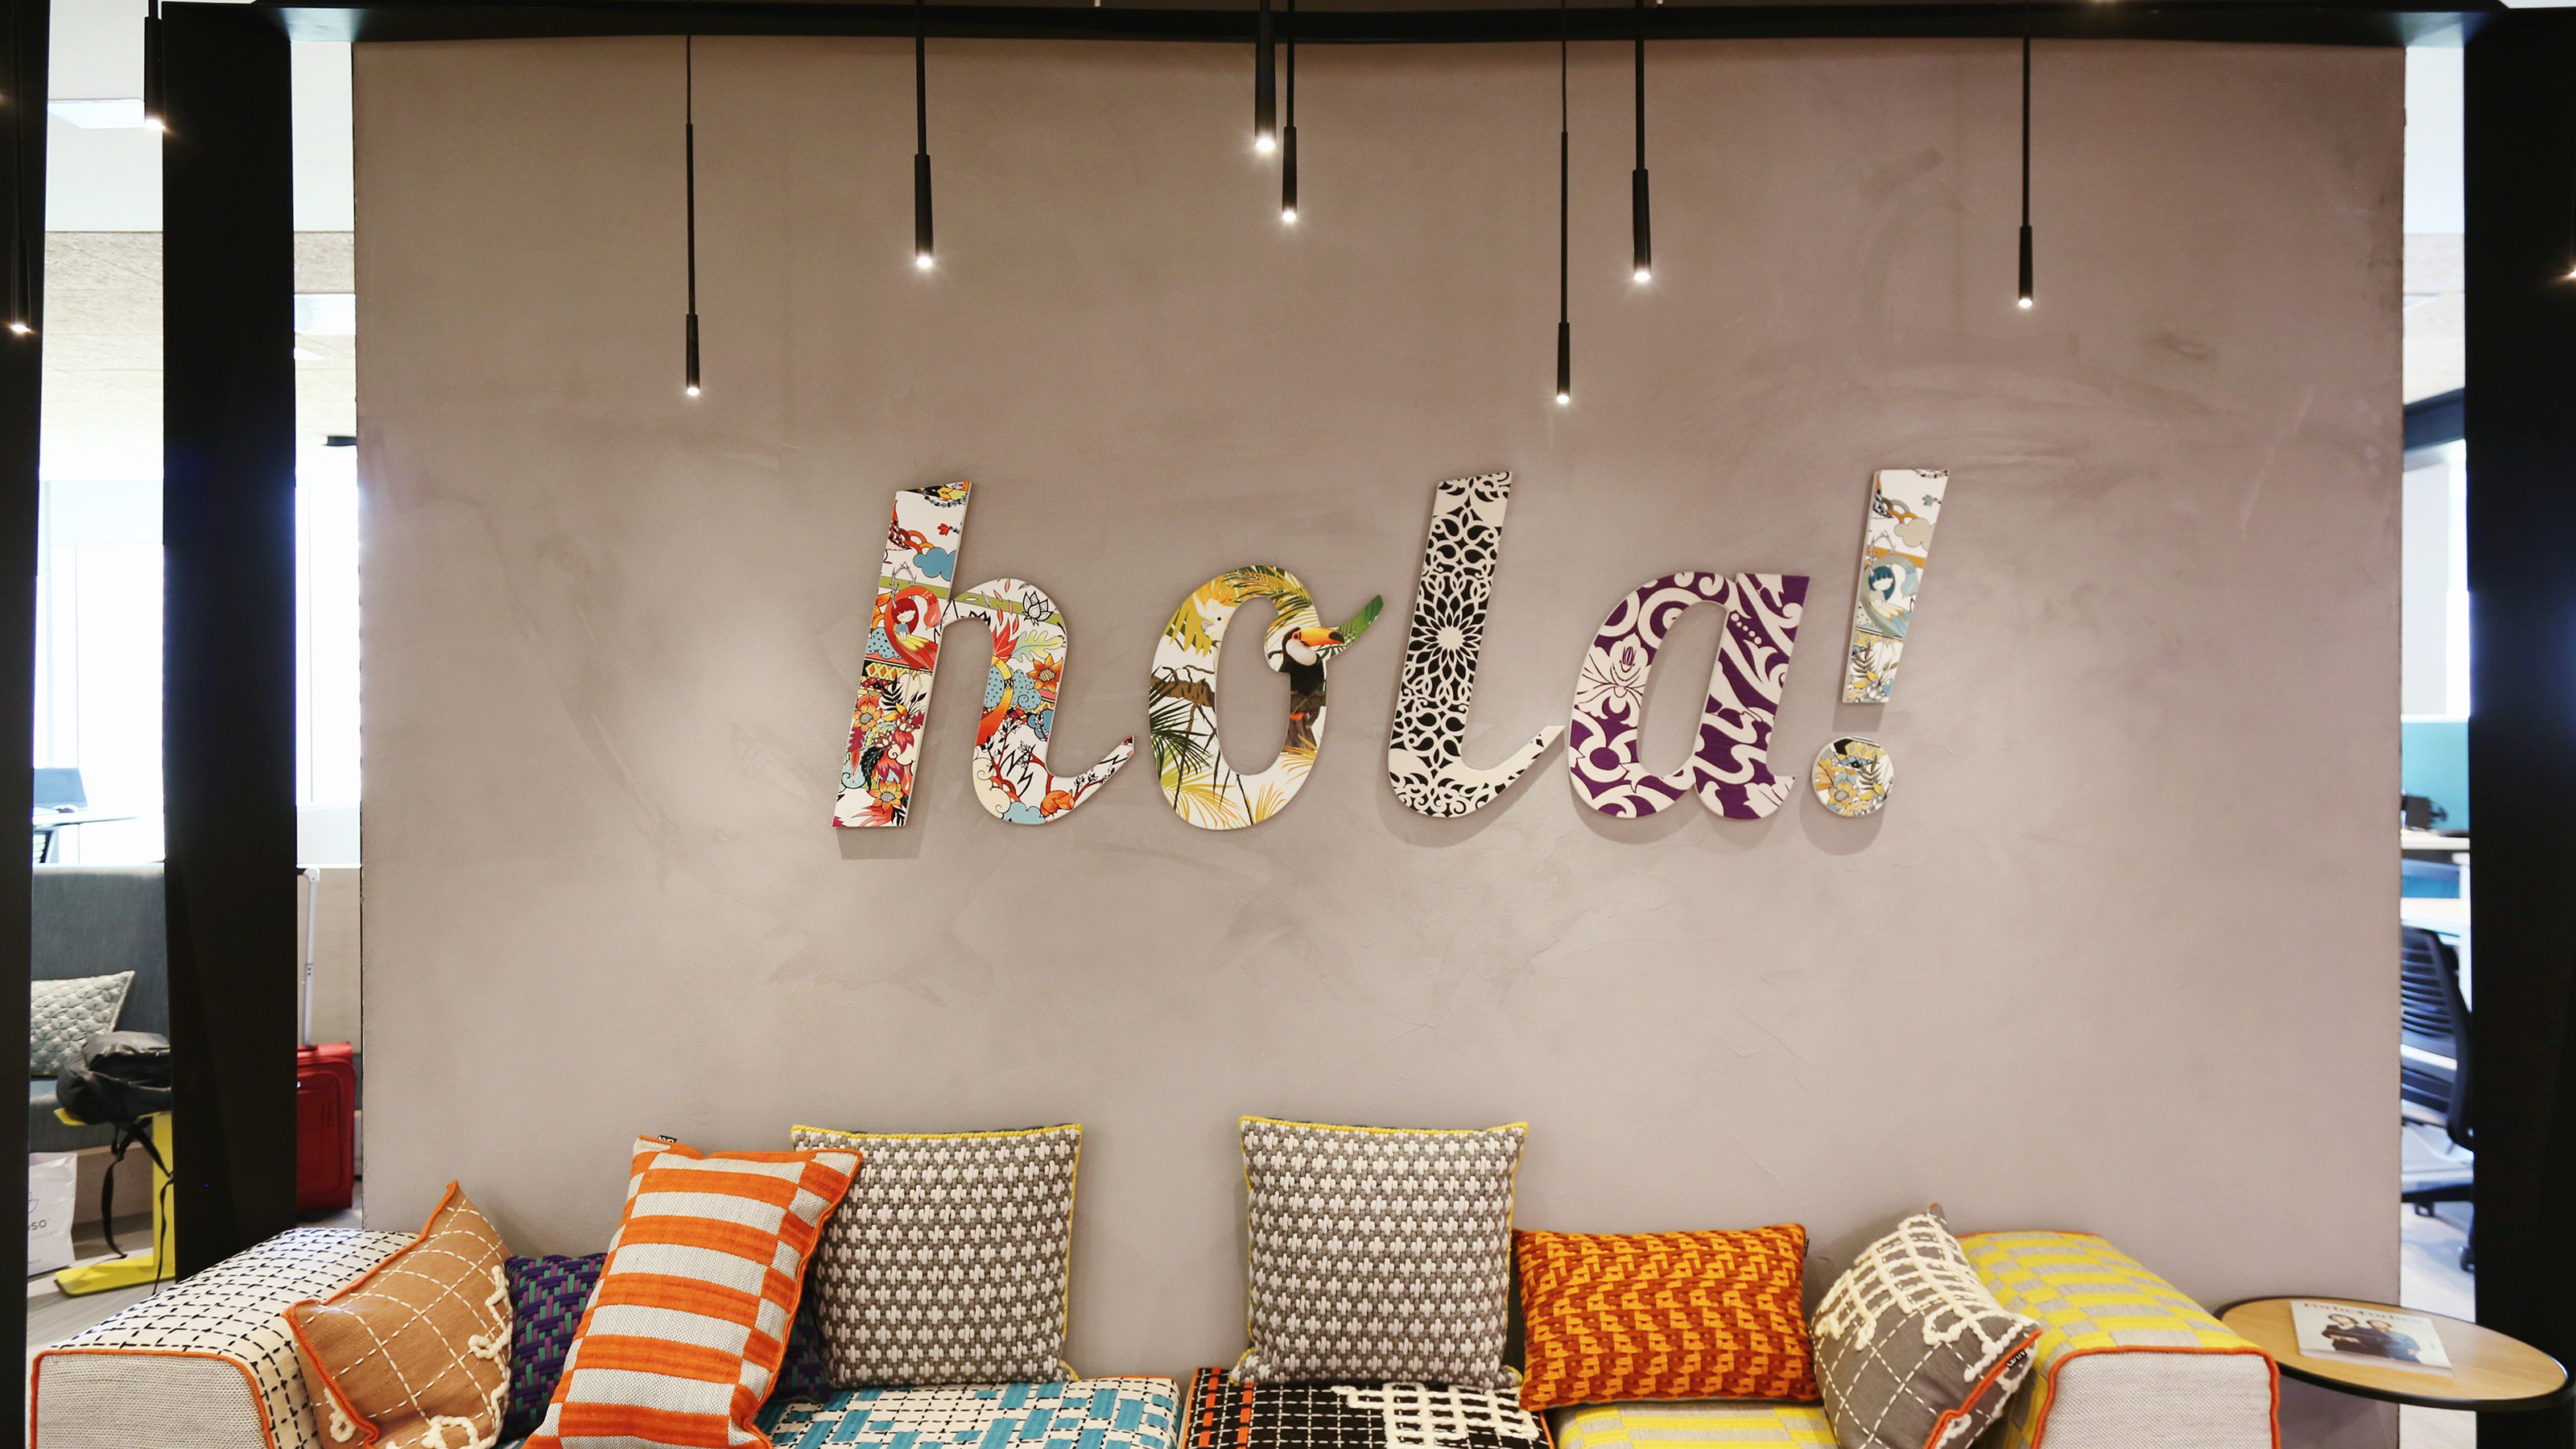 Gray wall with the word "hola" in the hanging in the middle